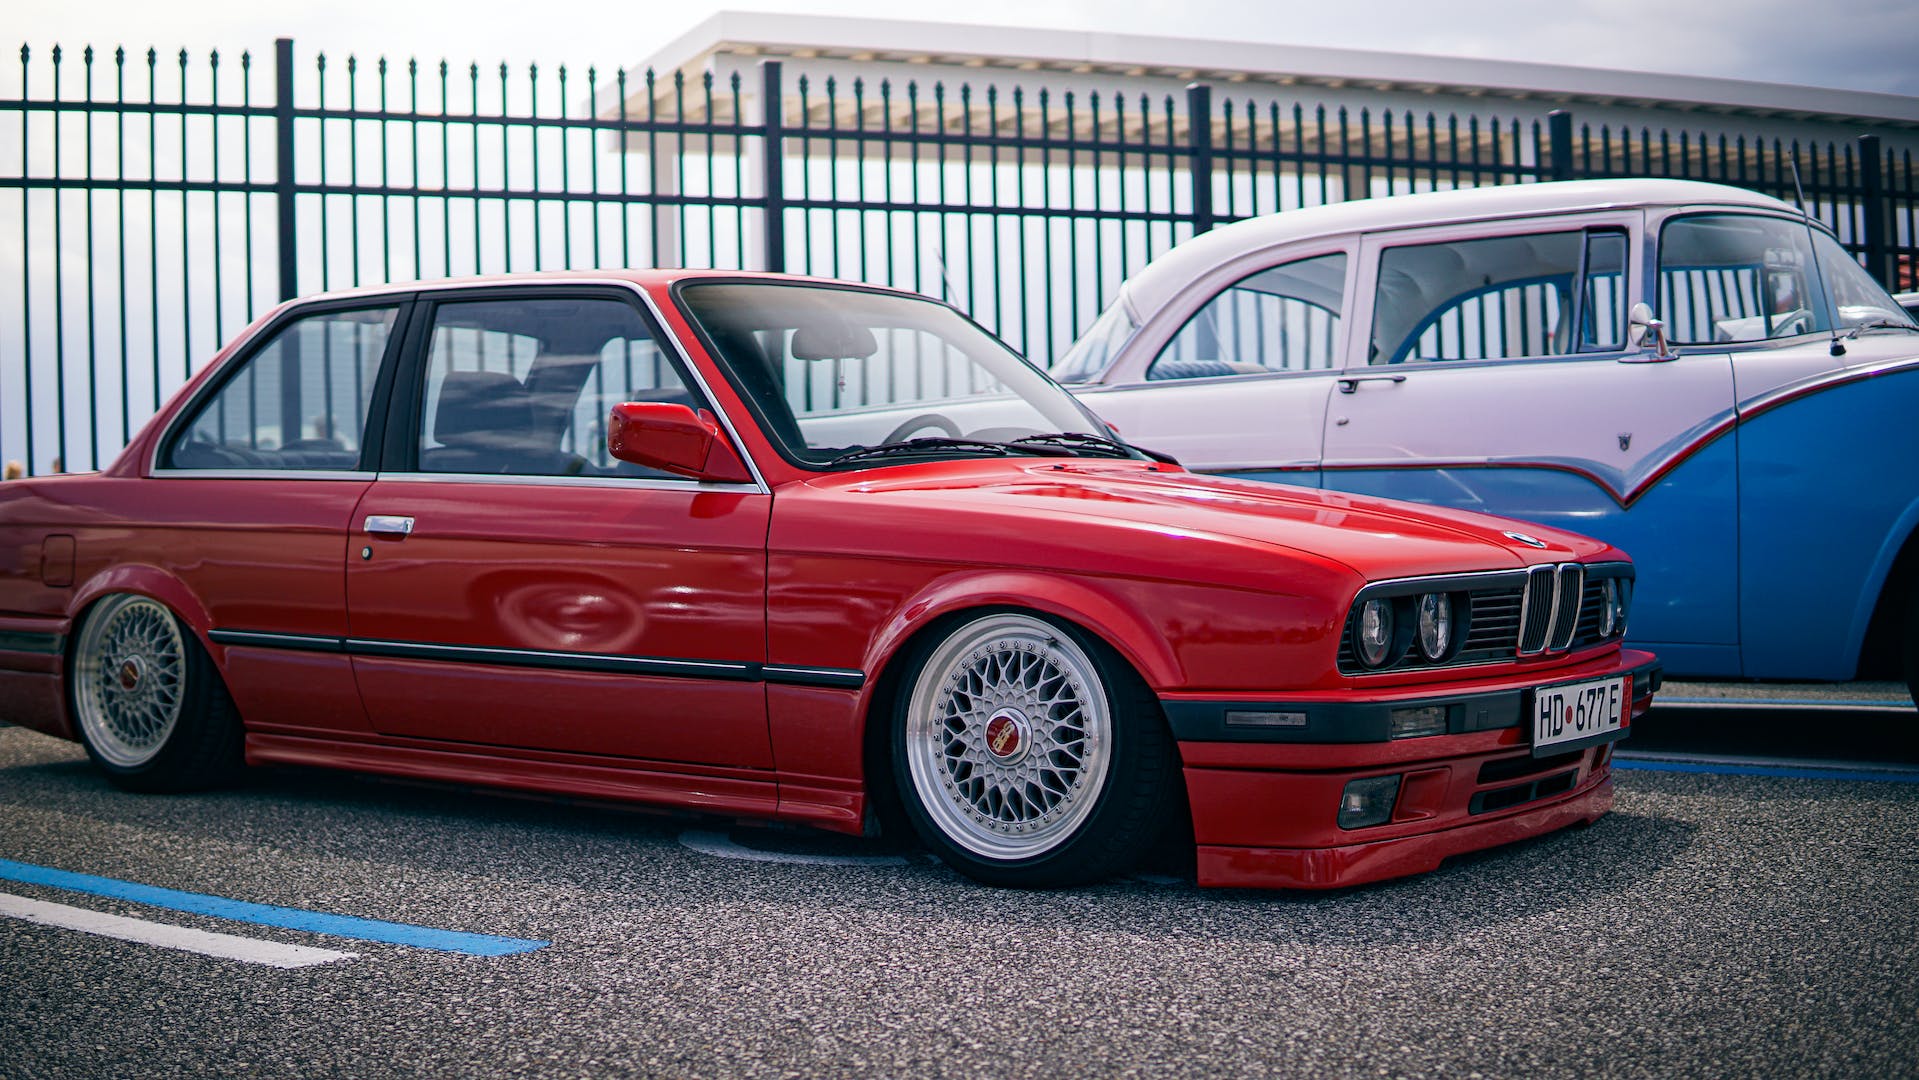 A classic red BMW E30 model with distinctive BBS rims is parked in front of a blue and white vintage car, both vehicles set against a backdrop of a metal fence and overcast sky.